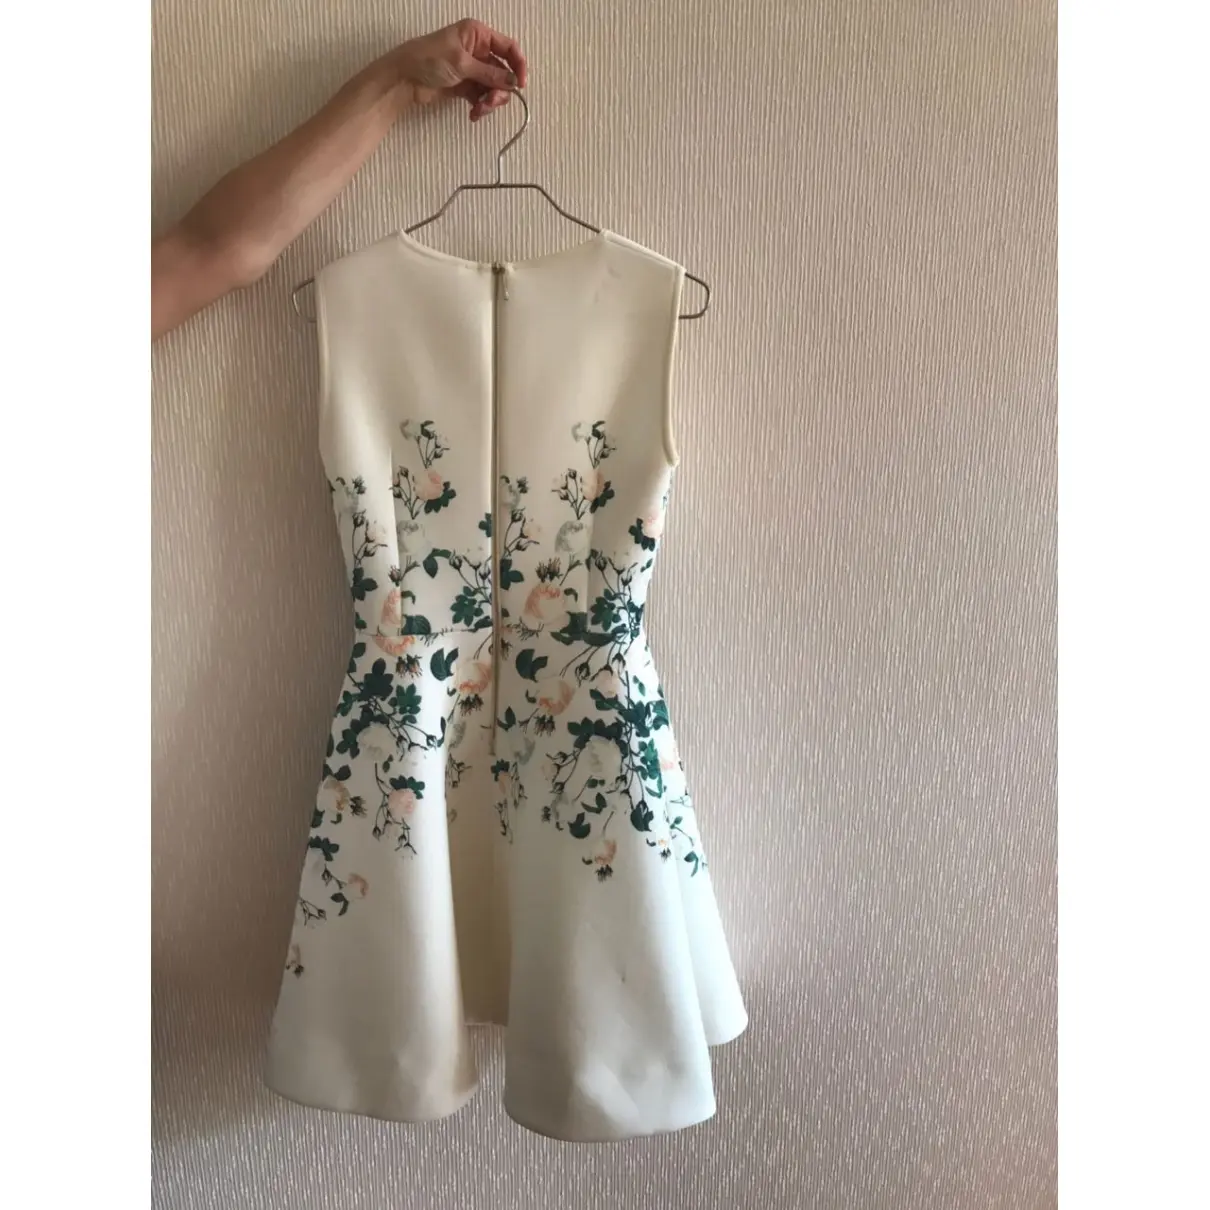 Erin Fetherston Mid-length dress for sale